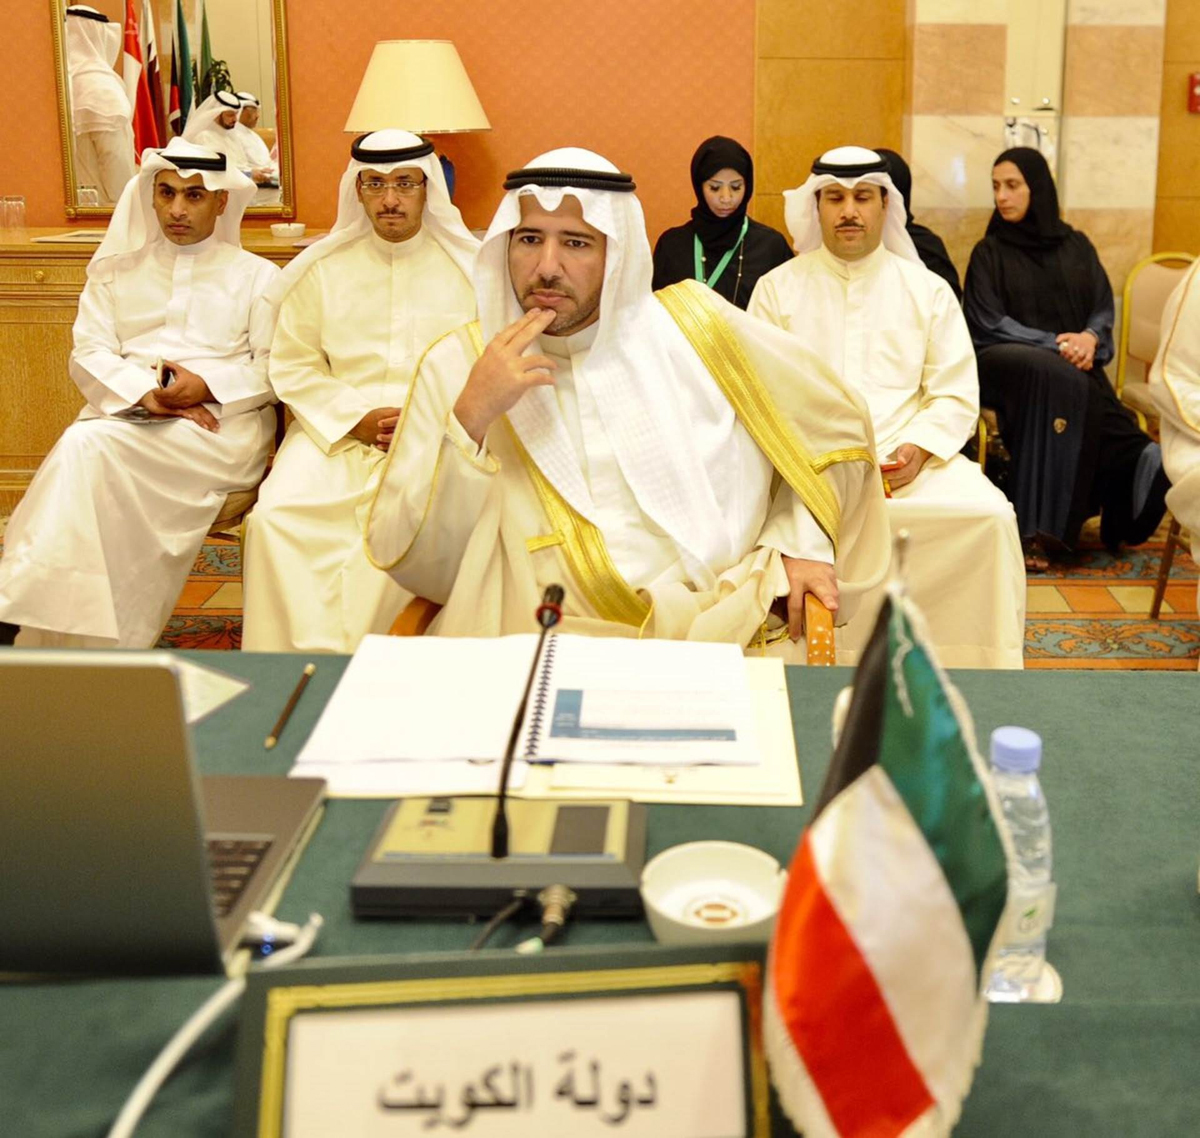 Director General and Chairman of Board of the Environment Public Authority (EPA) Sheikh Abdullah Al-Ahmad Al-Sabah